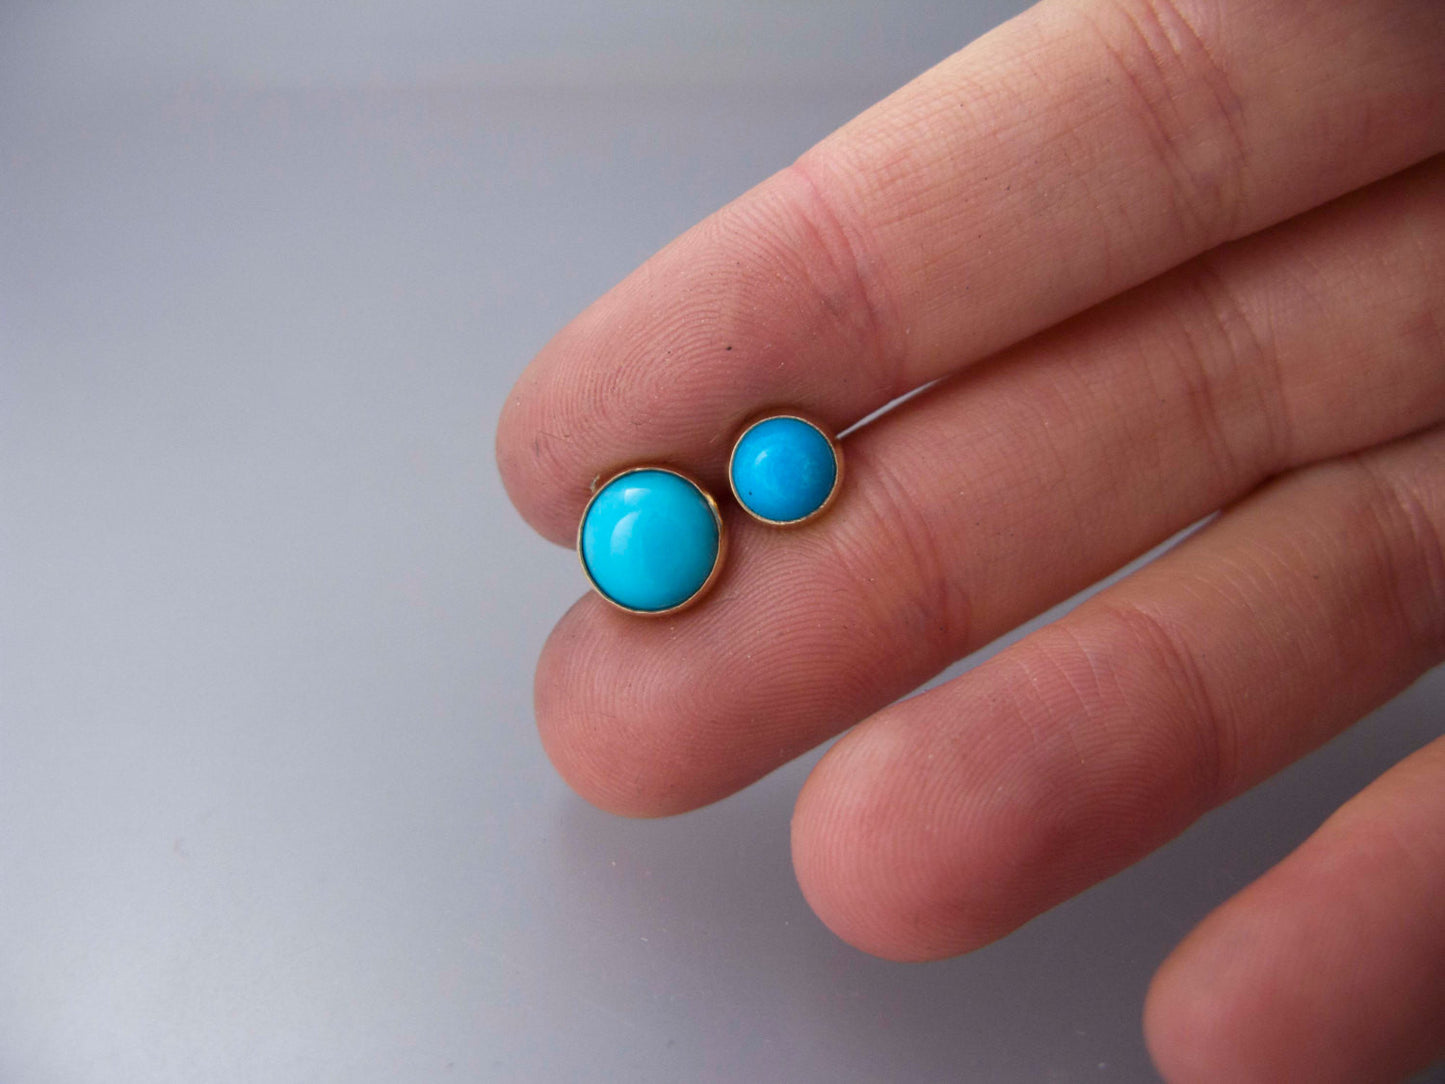 Large Turquoise Gold Studs - 8mm round cabochon bezel earrings